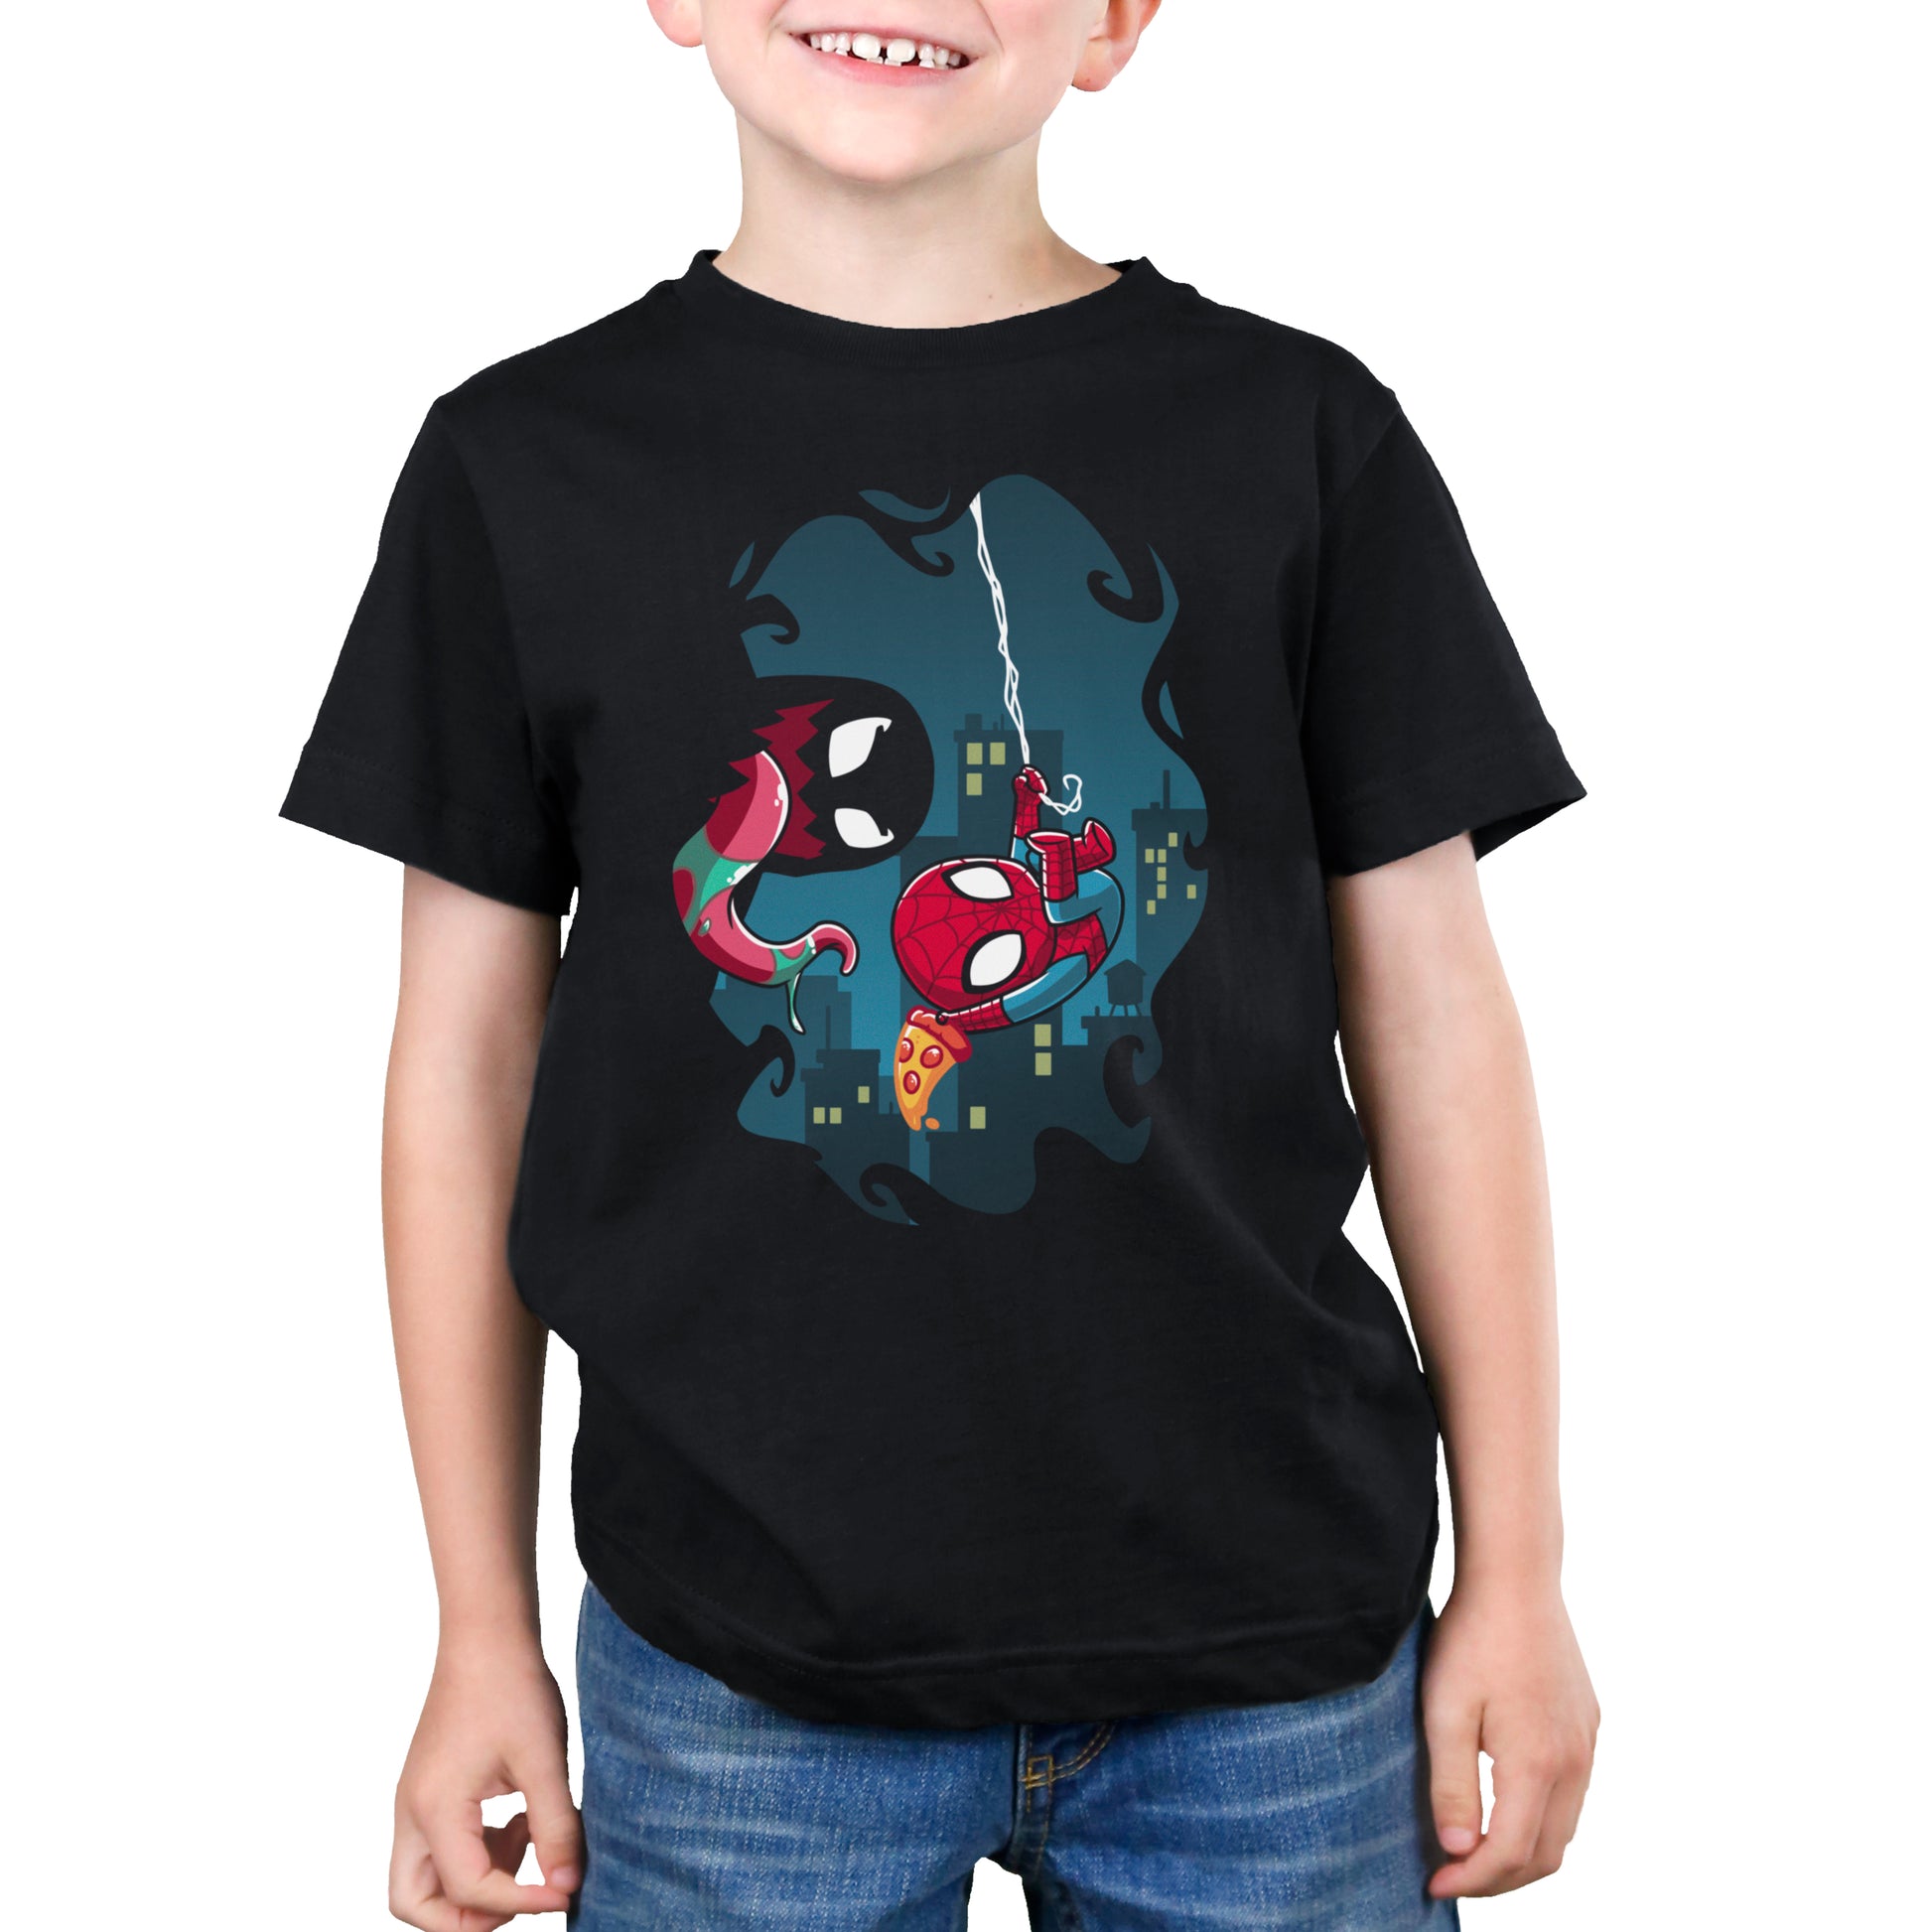 A boy wearing an officially licensed Marvel Symbiote Snack black t-shirt with Spider-Man on it, ready to protect the city.